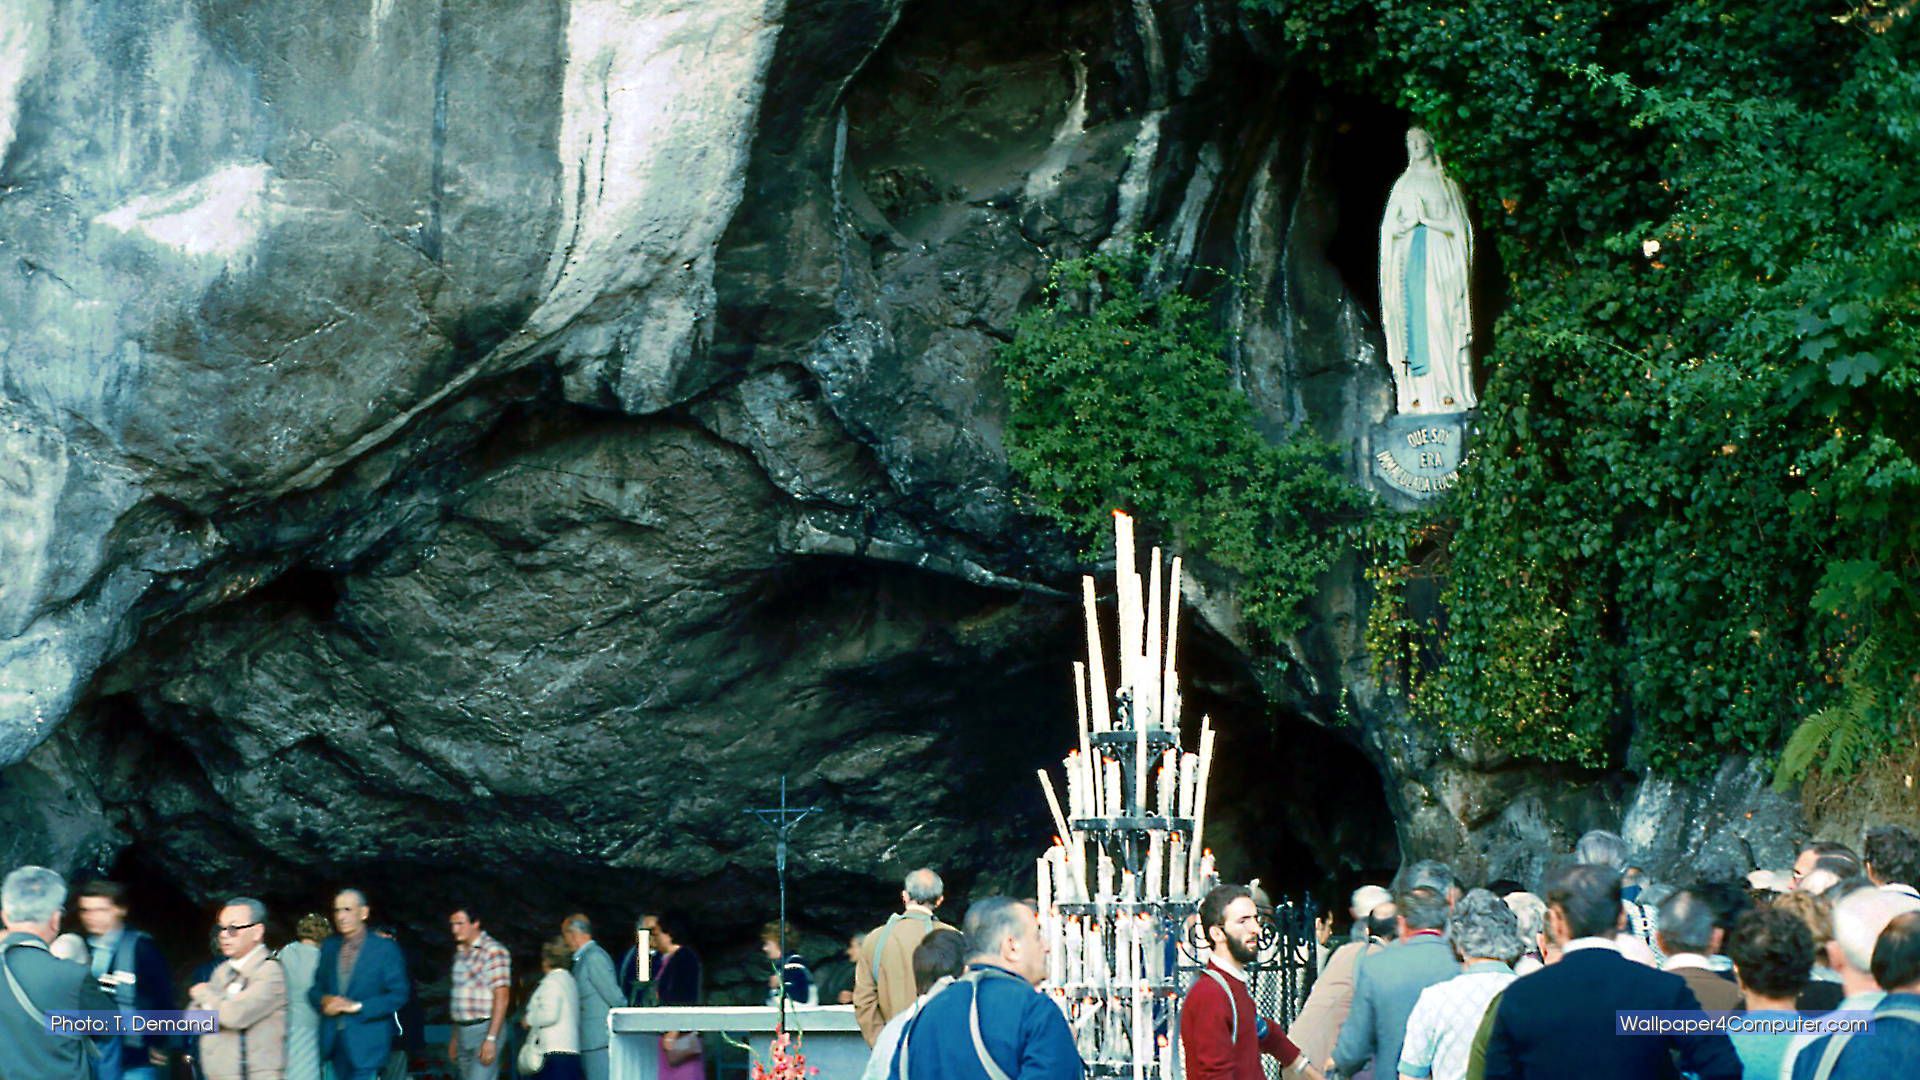 The Sanctuaries of Lourdes. Photo: (c)1980 T. Demand, Wallpaper: 2011 T. Demand, Wpic This wallpaper is free to be used as a desktop wallpaper on your computer. Any other usage, publication, distribution is not allowed.